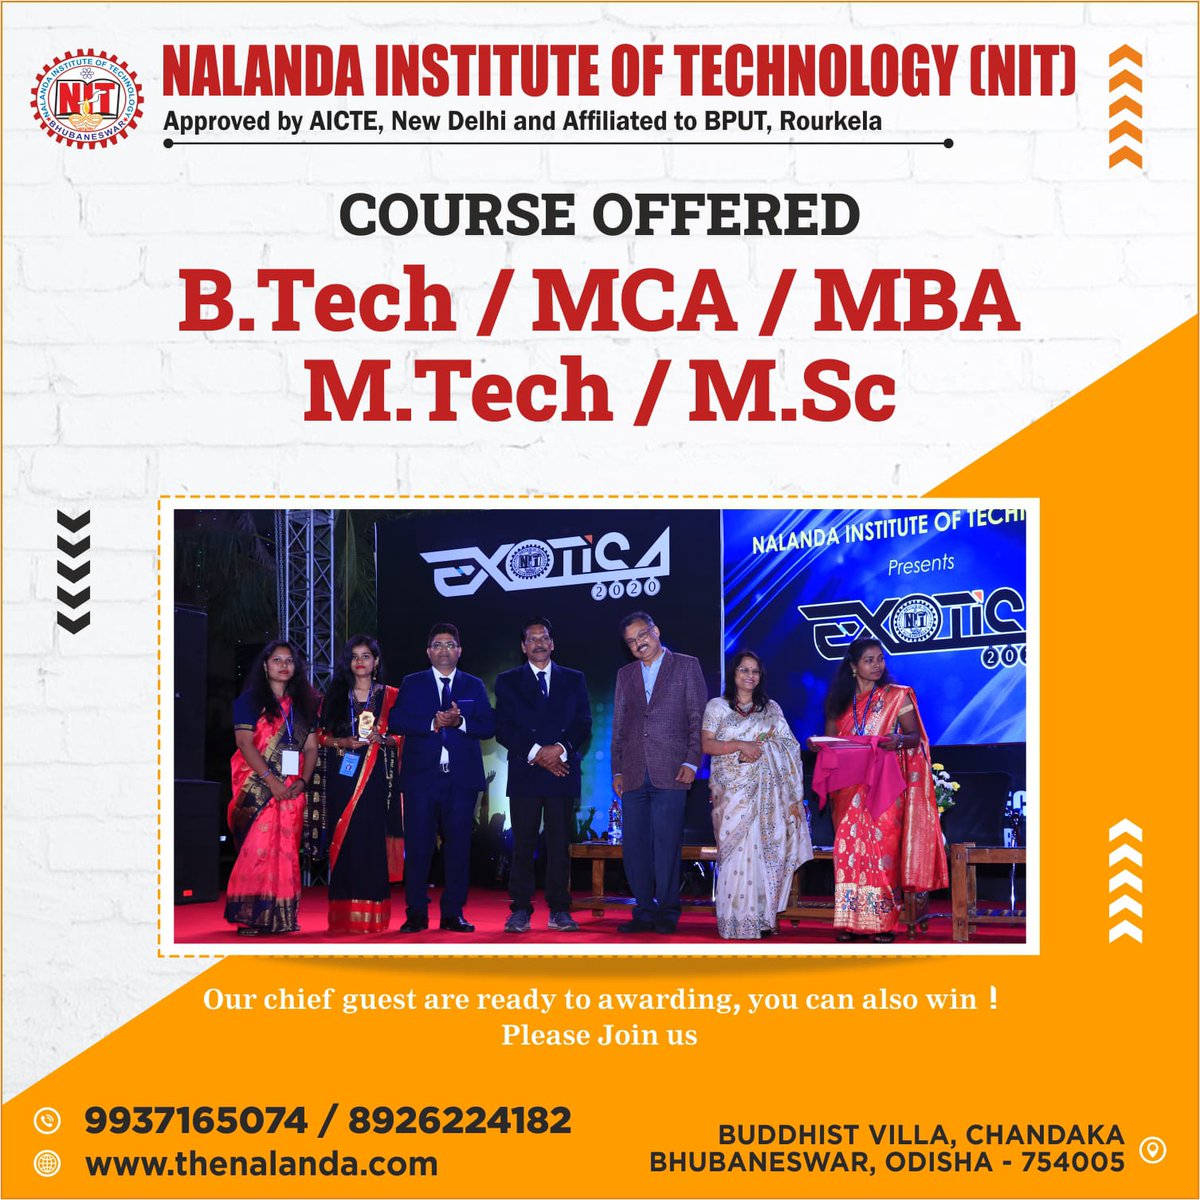 #FacultyExcellence: Our esteemed faculty members at Nalanda Institute of Technology (NIT), Bhubaneswar are dedicated to your academic success and personal growth. With their expertise, mentorship, and guidance, you will receive a world-class education and